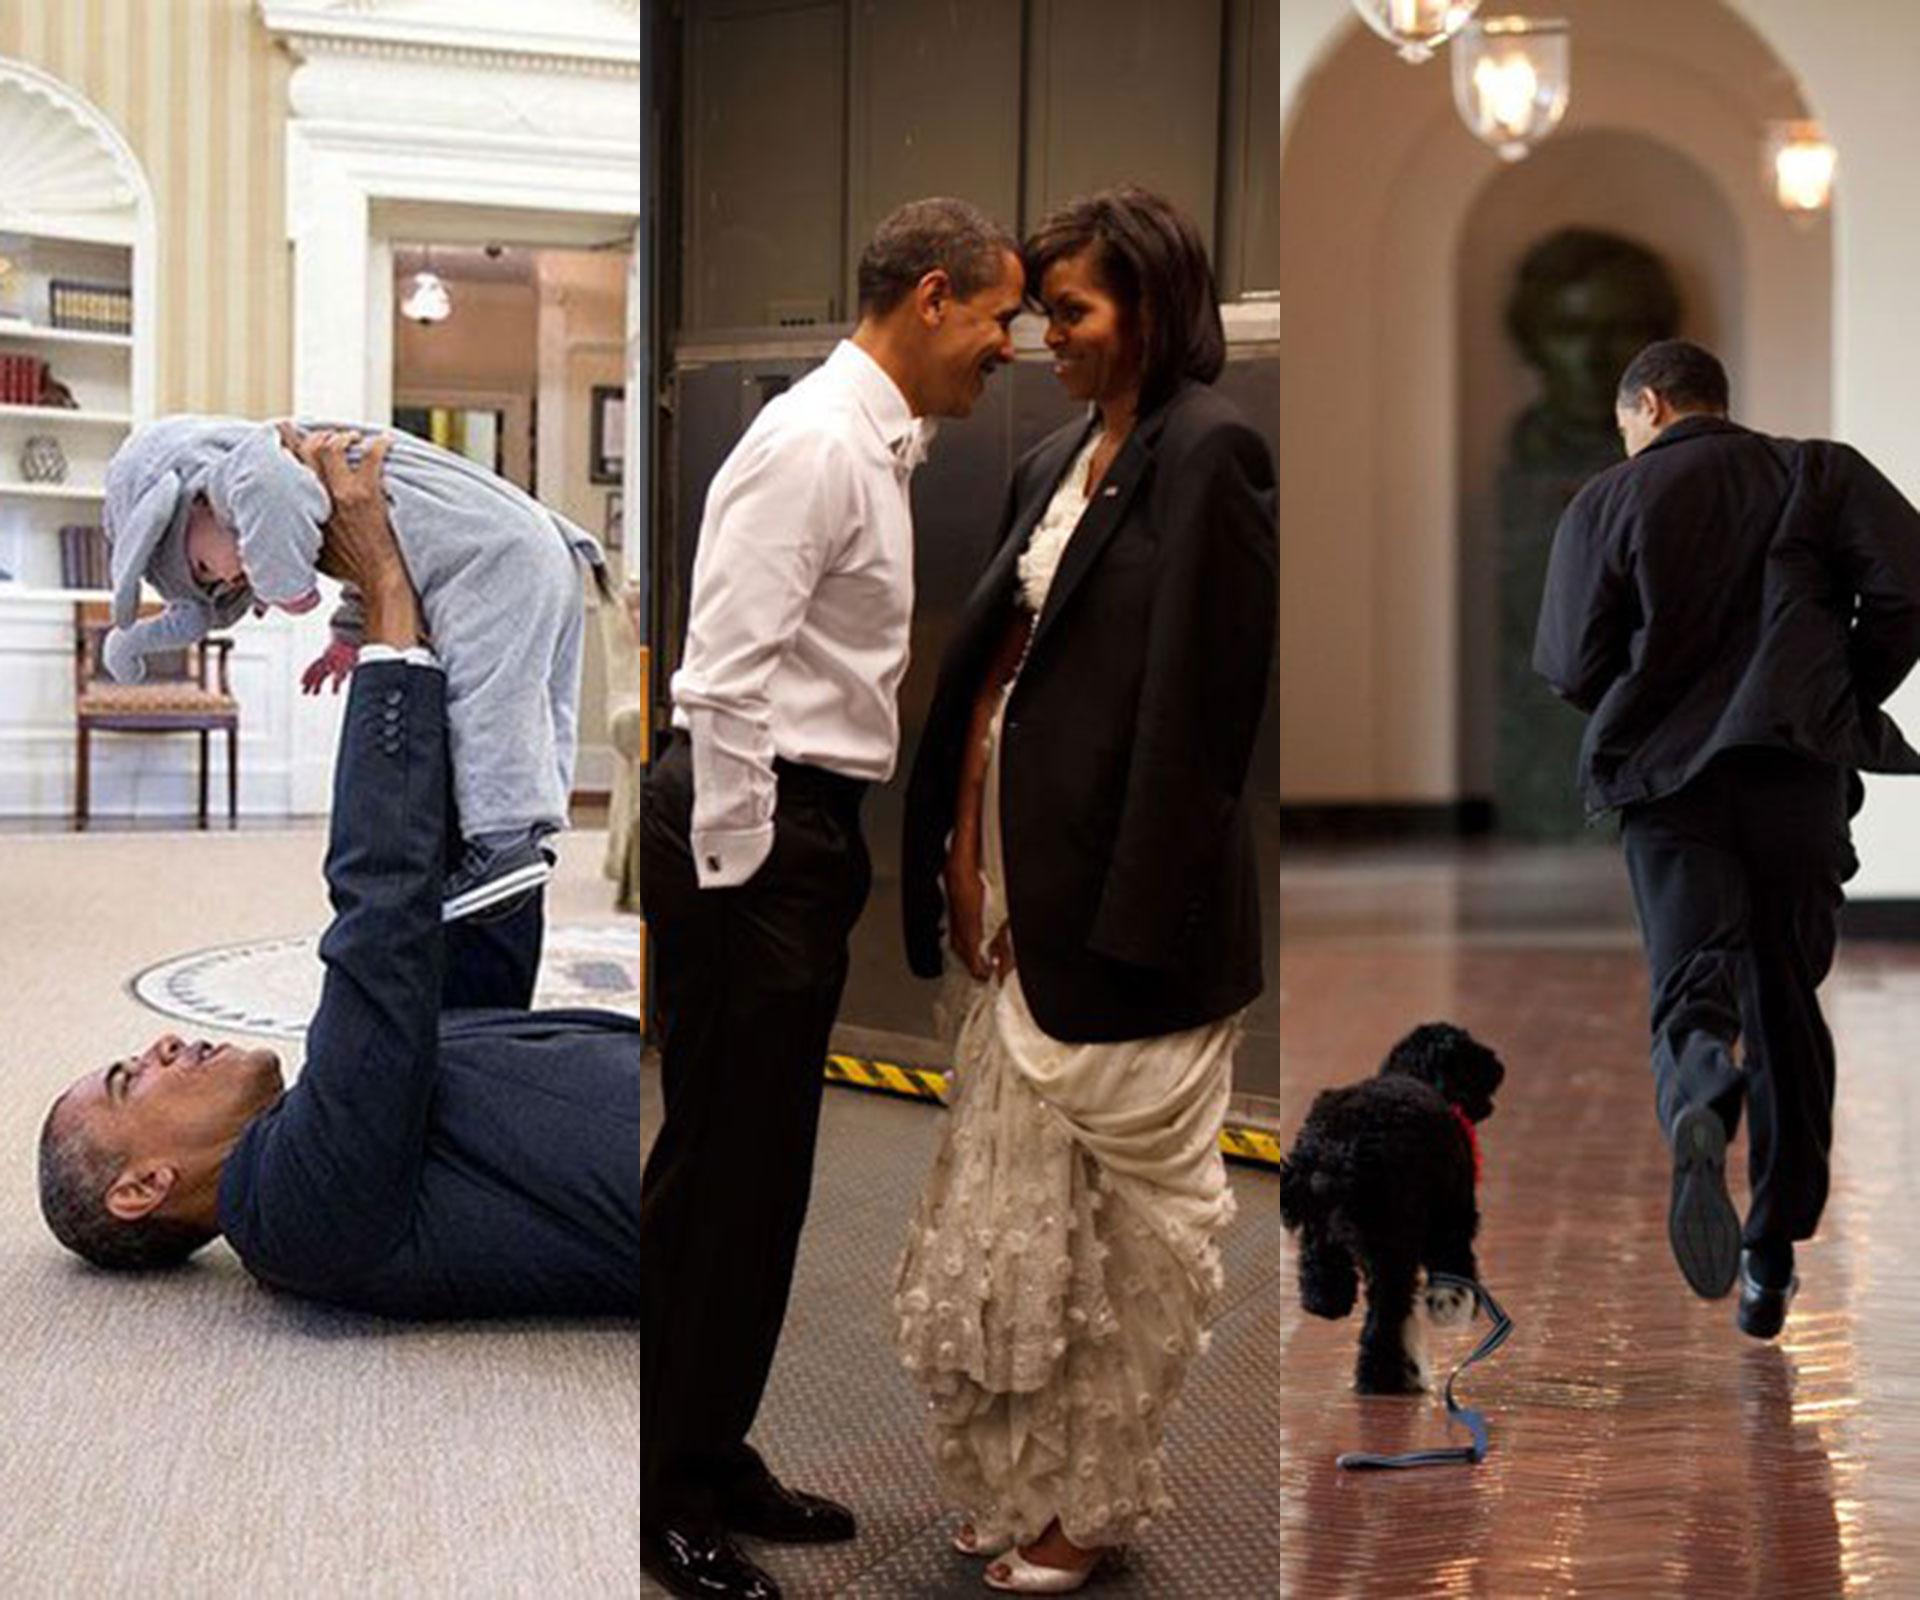 Official White House photographer picked his favourite Obama pictures